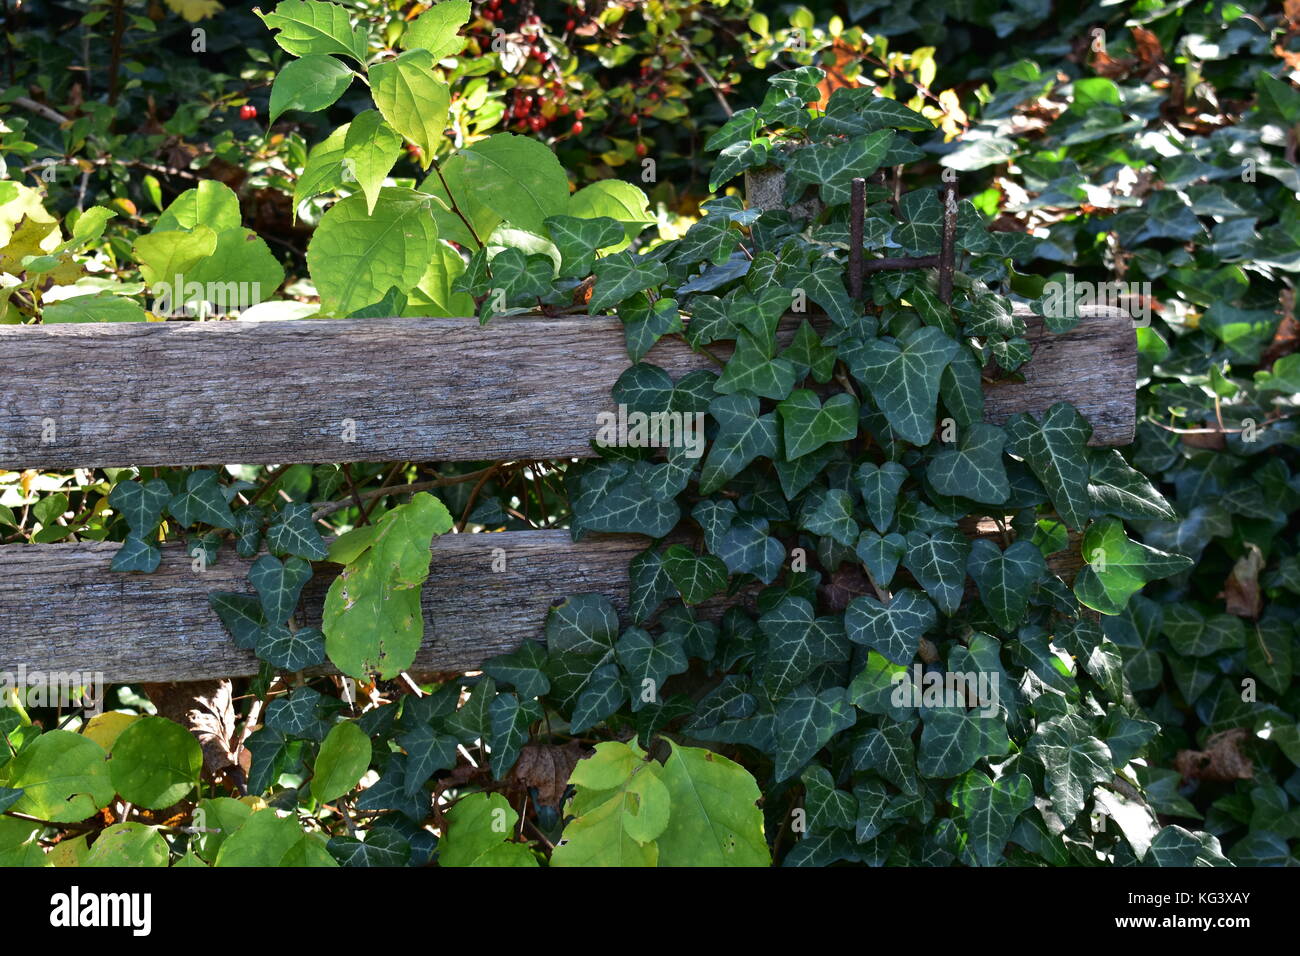 Ivy and other natural growth overtaking old bench in overgrown vegetated area Stock Photo